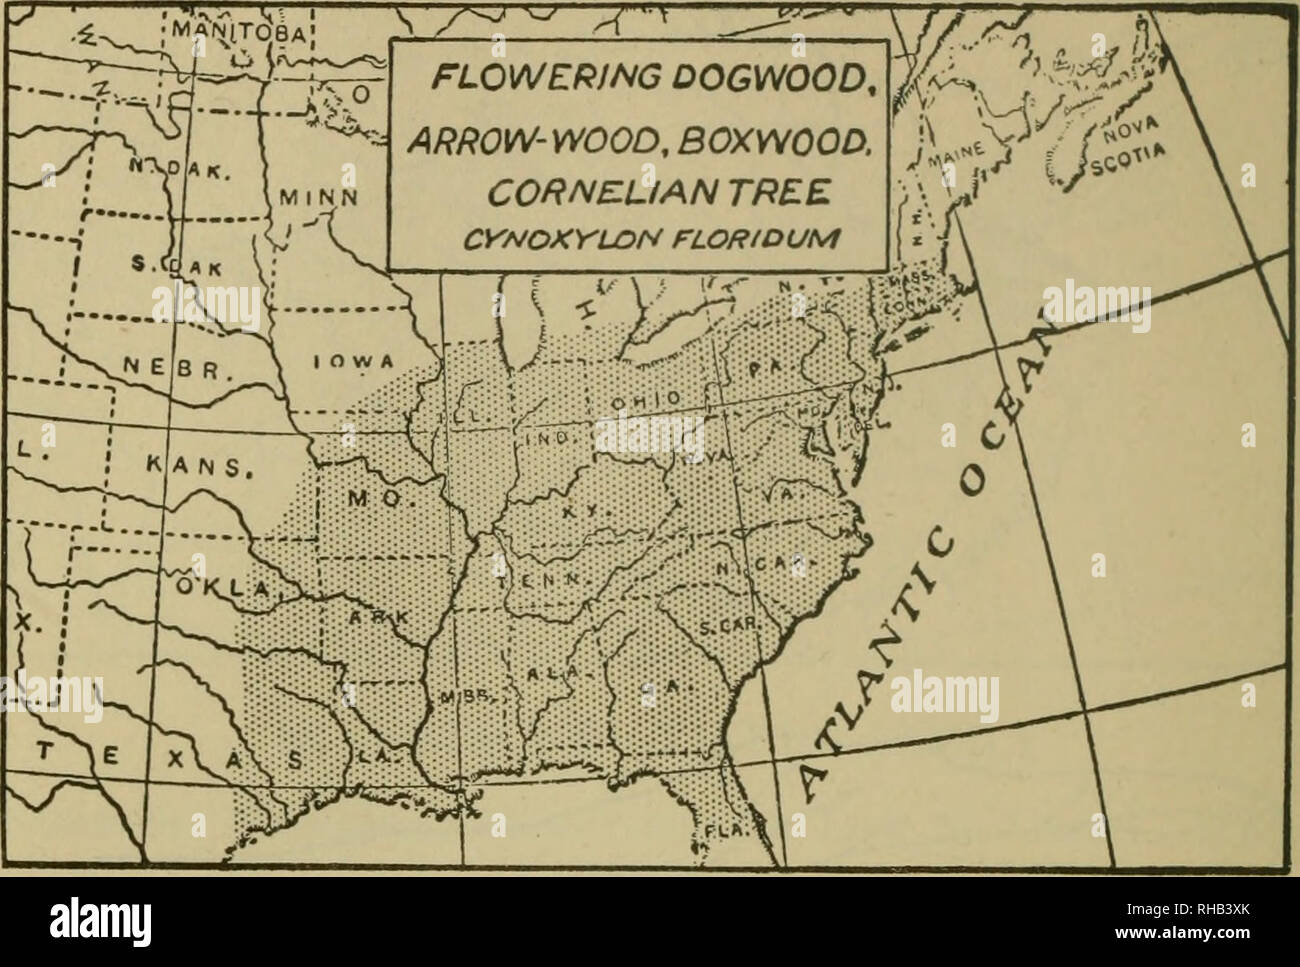 . The book of woodcraft and Indian lore. Natural history; Camping; Outdoor life; Indians of North America. 452 The Book of Woodcraft. 21. CORNACE^ — DOGWOOD FAMILY Flowering Dogwood, Arrow-wood, Boxwood, Cornelian Tree, (Cynoxylon floridum) A small tree 15 to 20 feet, rarely 40, with bark beautifully pebbled or of alligator pattern. Wood hard, close, tough, strong, and heavy, a cubic foot weighing 51 lbs. Noted for its masses of beautiful white bloom in spring. A tea of its roots is a good substitute for quinine. Leaves 3 to 5 inches long.. Please note that these images are extracted from scan Stock Photo